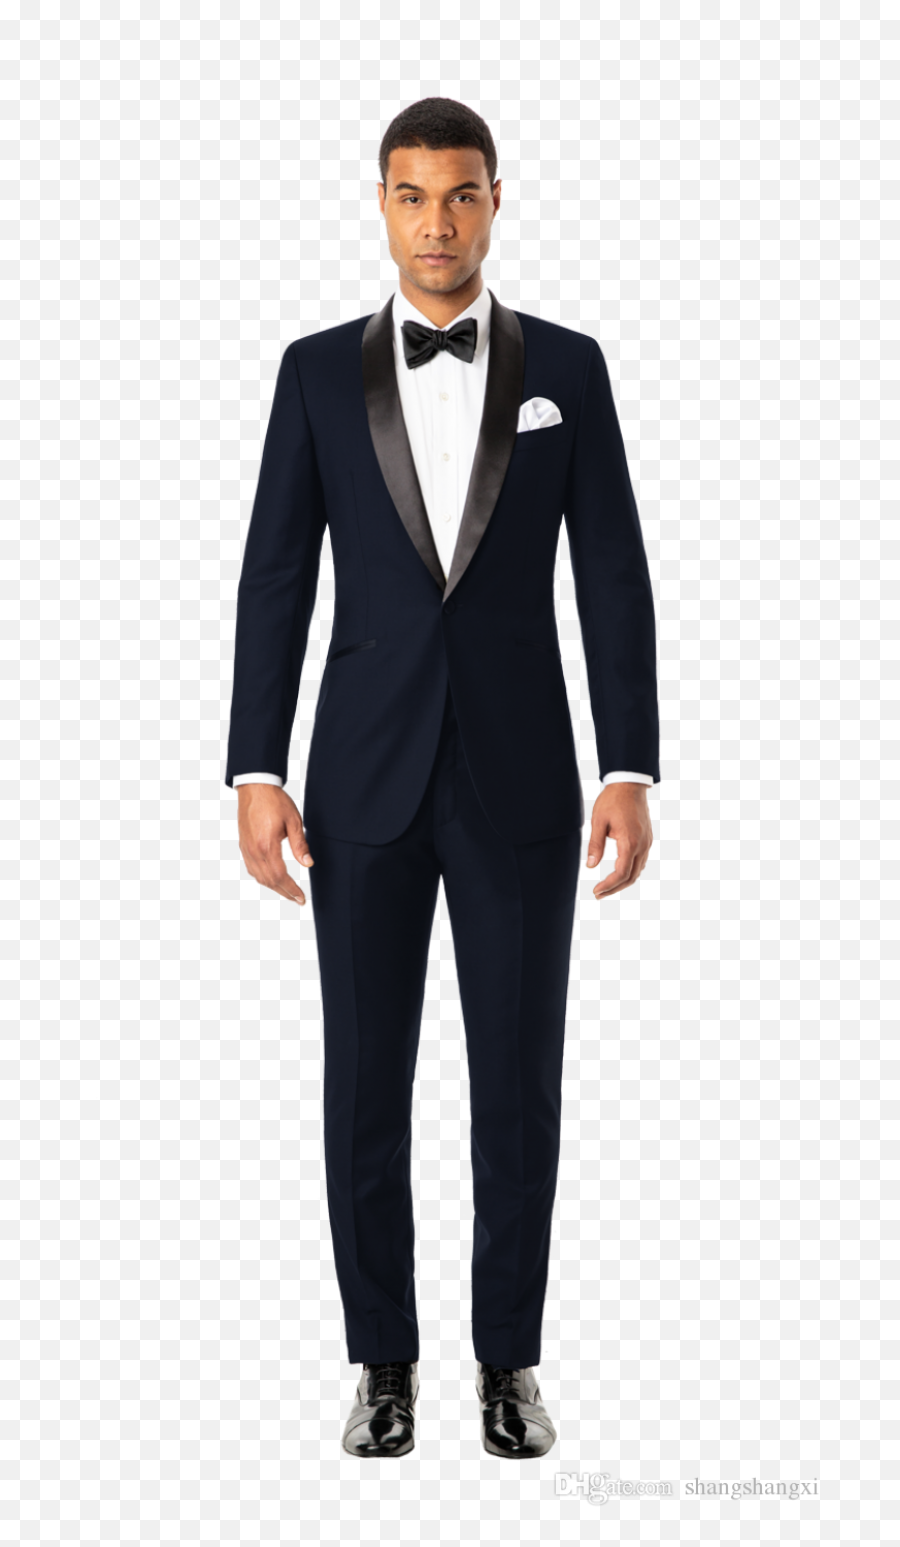 Groom Png Image - Transparent Groom Png,Suit And Tie Png